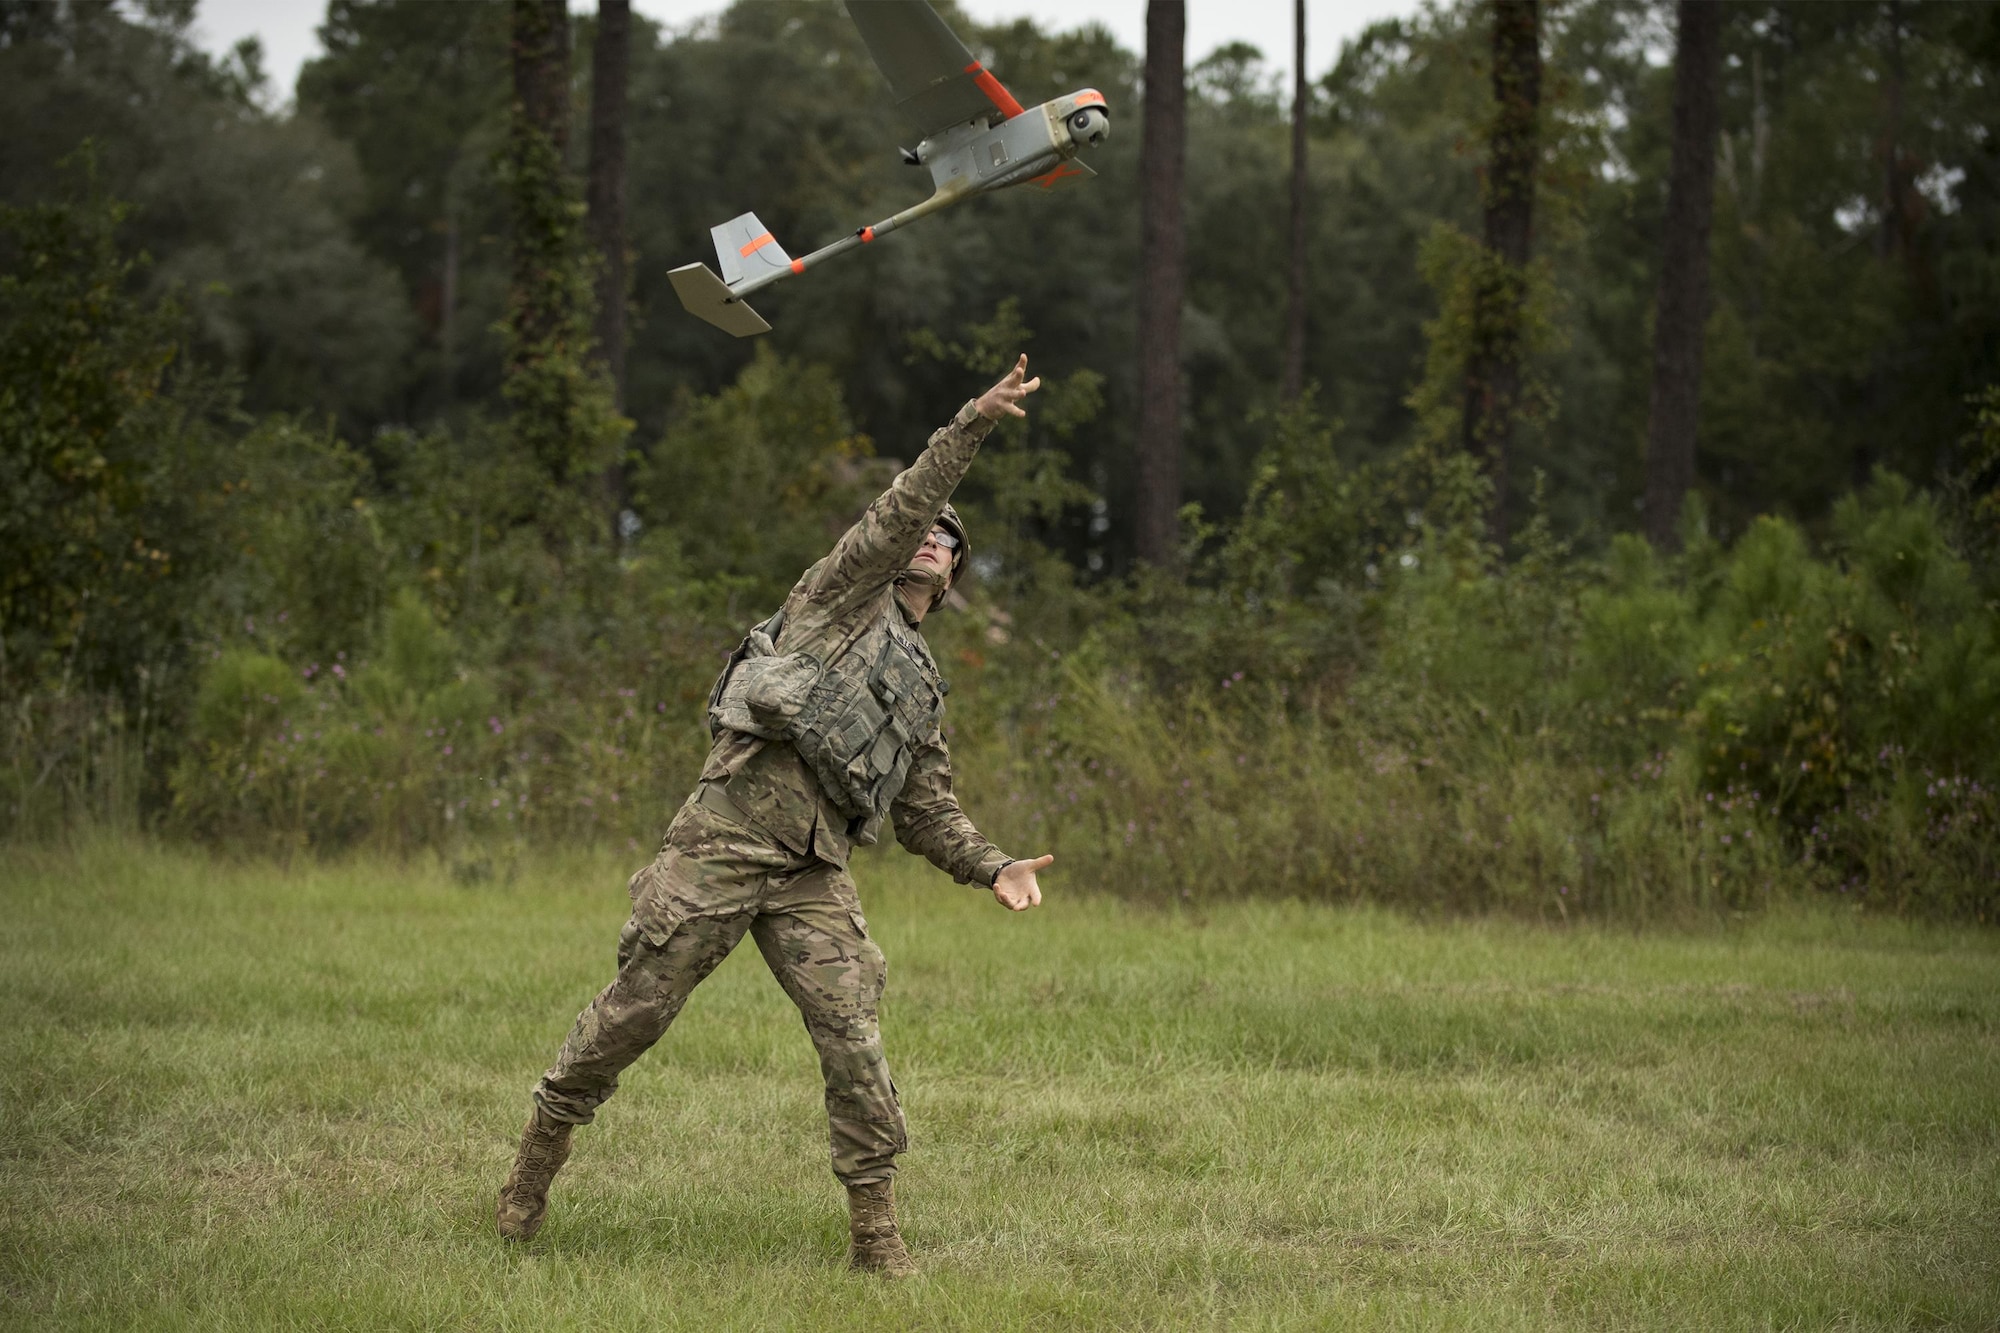 A U.S. Air Force Airman from the 820th Base Defense Group launches an RQ-11 Raven into flight, Oct. 6, 2016, at Moody Air Force Base, Ga. The RQ-11 is a remote-controlled aerial vehicle that provides real-time situational awareness while flying at speeds of 30 to 60 mph. (U.S. Air Force photo by Airman 1st Class Daniel Snider)